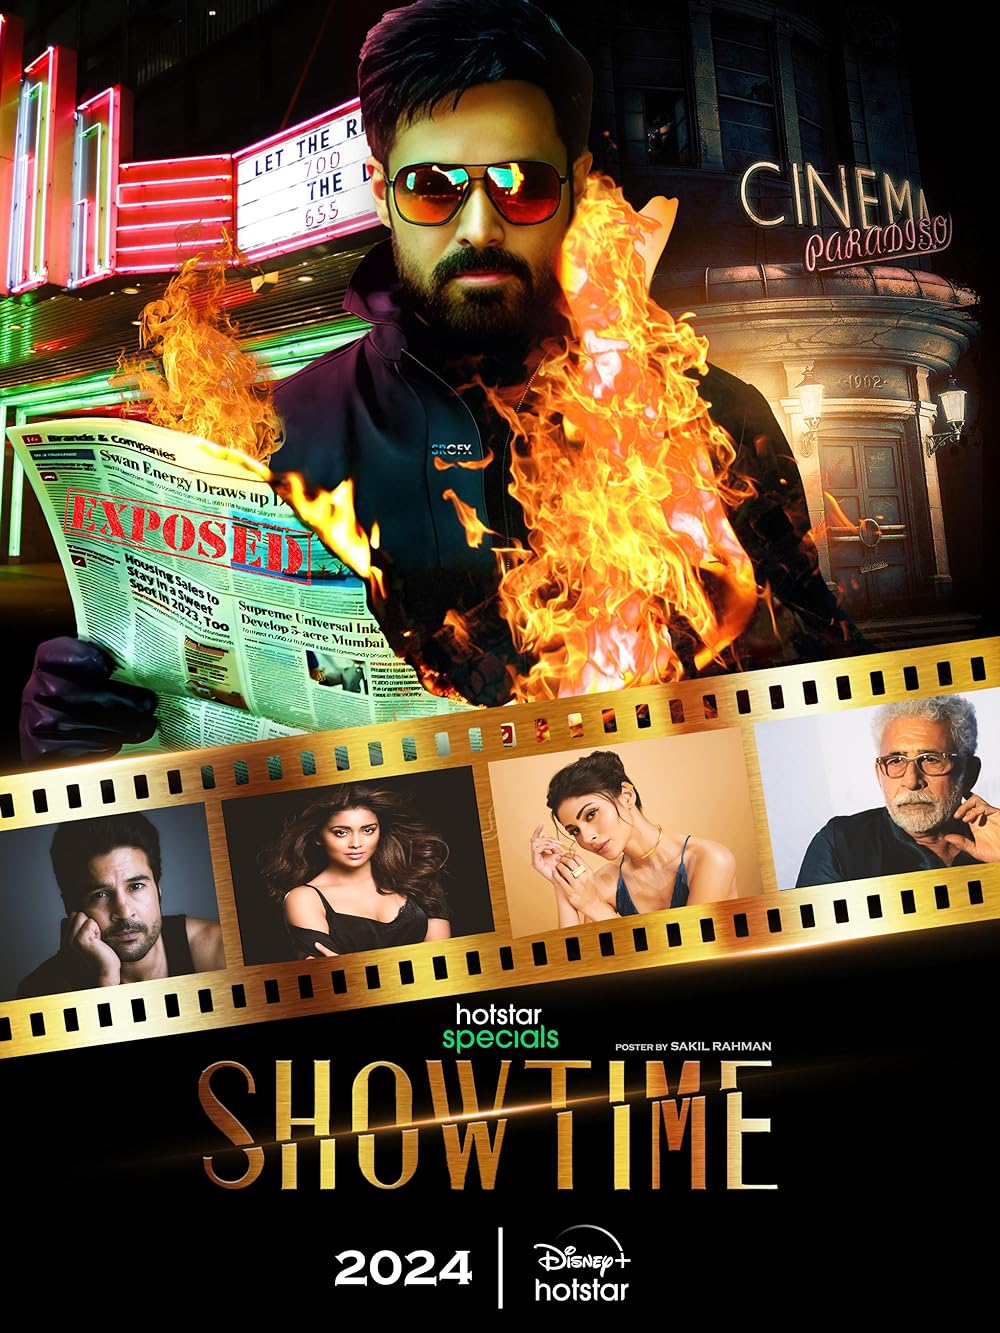 Showtime - March 8 - Streaming on Disney+ HotstarShowtime, created by Sumit Roy, unravels against the glamorous backdrop of Bollywood. Starring Emraan Hashmi, Naseeruddin Shah, and Mouni Roy, the series delves deep into the industry's unseen battles for power and fame. It explores intense rivalries, personal and professional turmoil, and the dark underbelly of Bollywood lurking beneath its sparkling facade. 